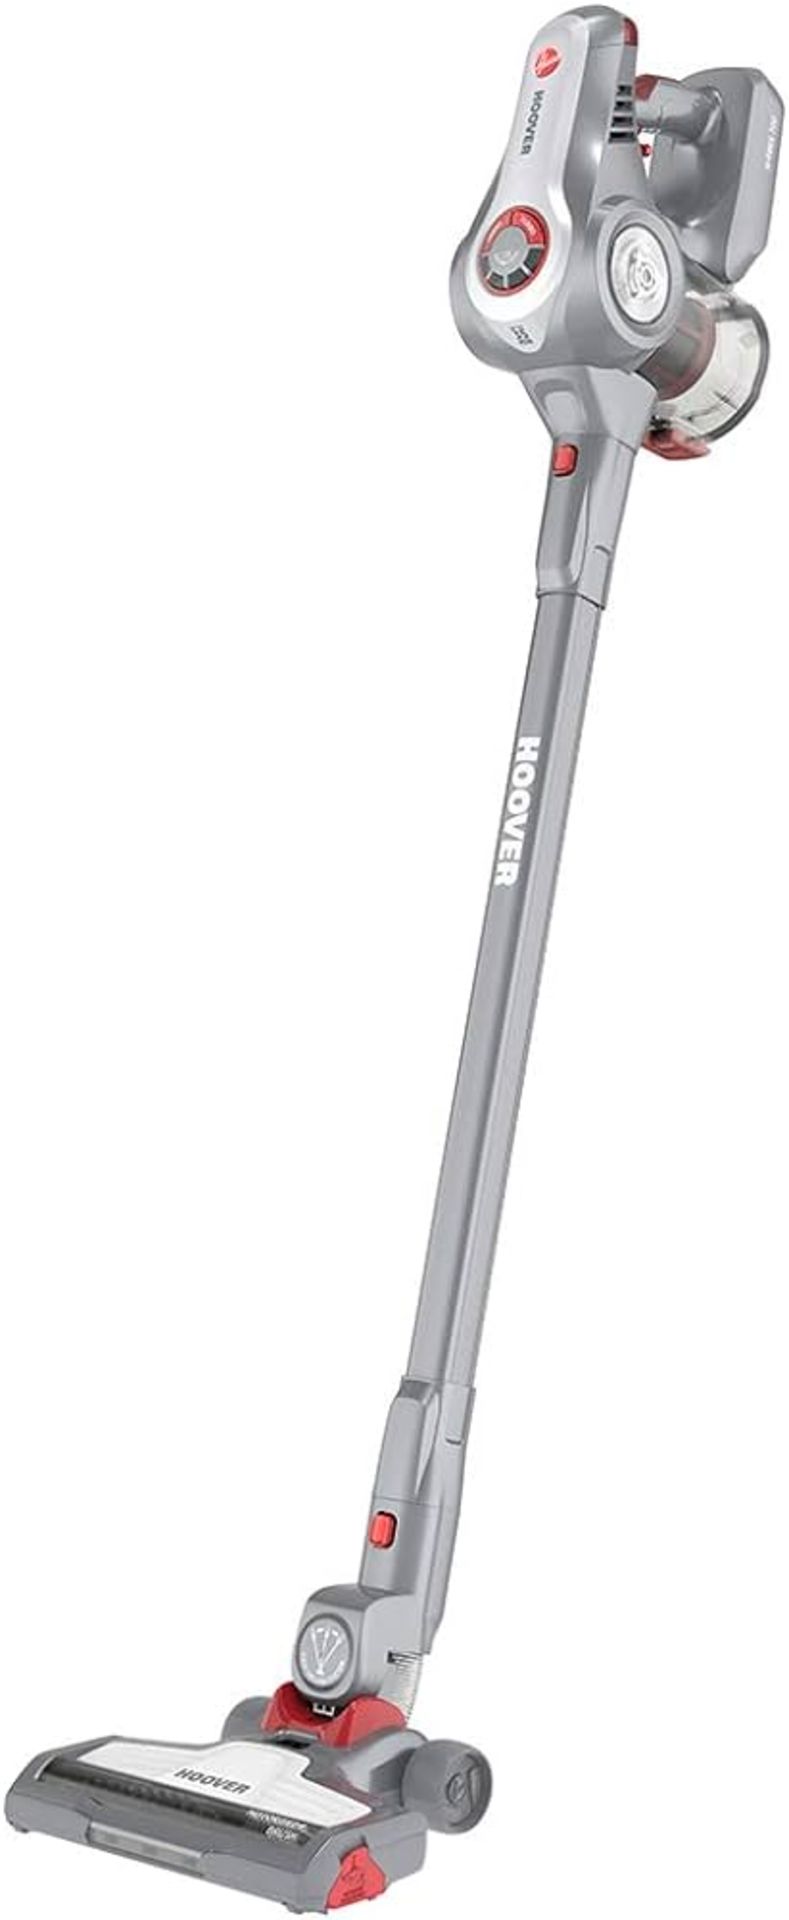 H-FREE 700 Hoover Cordless Stick Vacuum. - BW. RRP £149.99. the cordless stick vacuum with high-